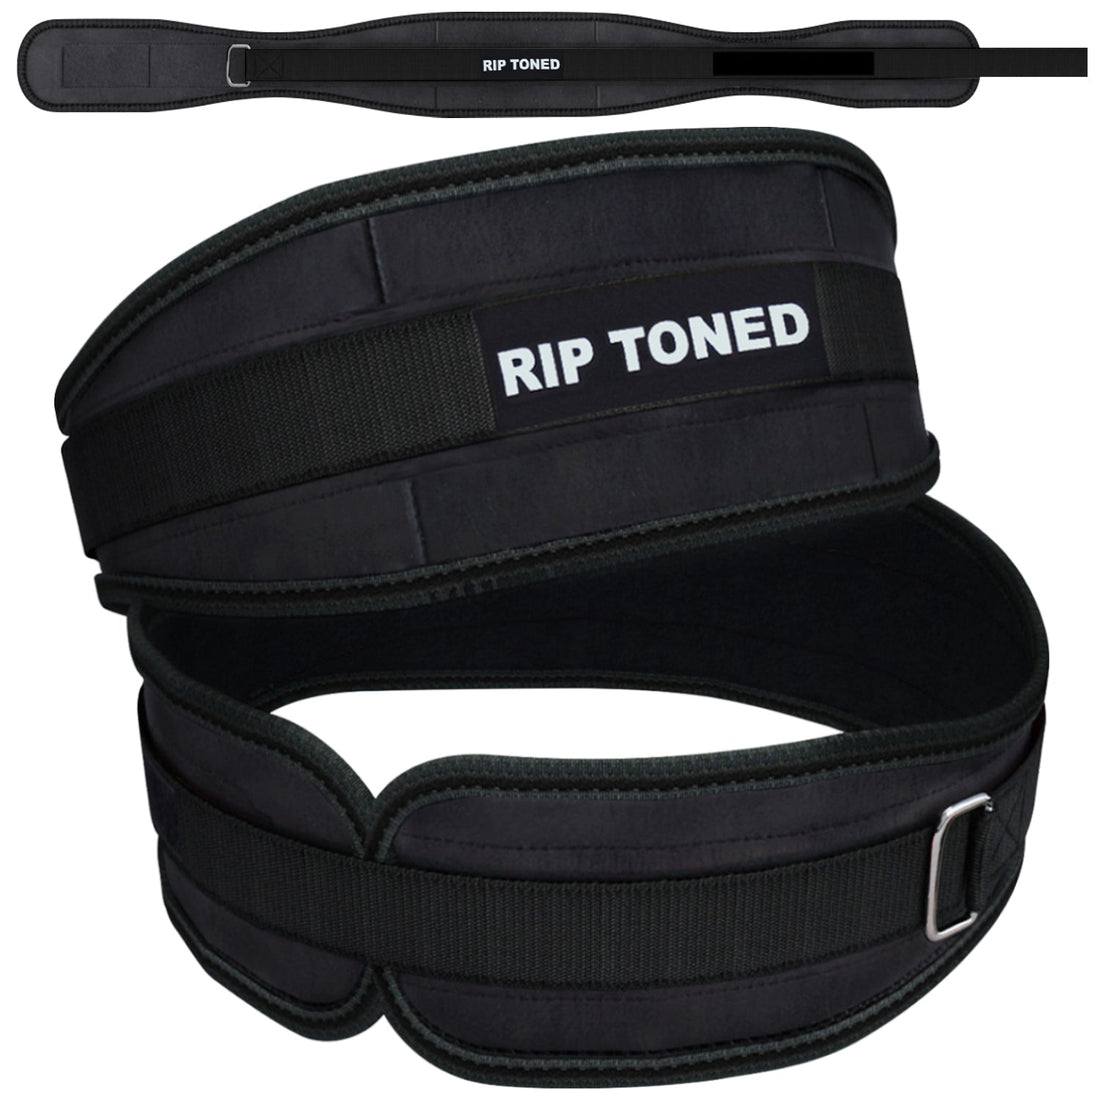 What Size Lifting Belt Should I Get - Rip Toned